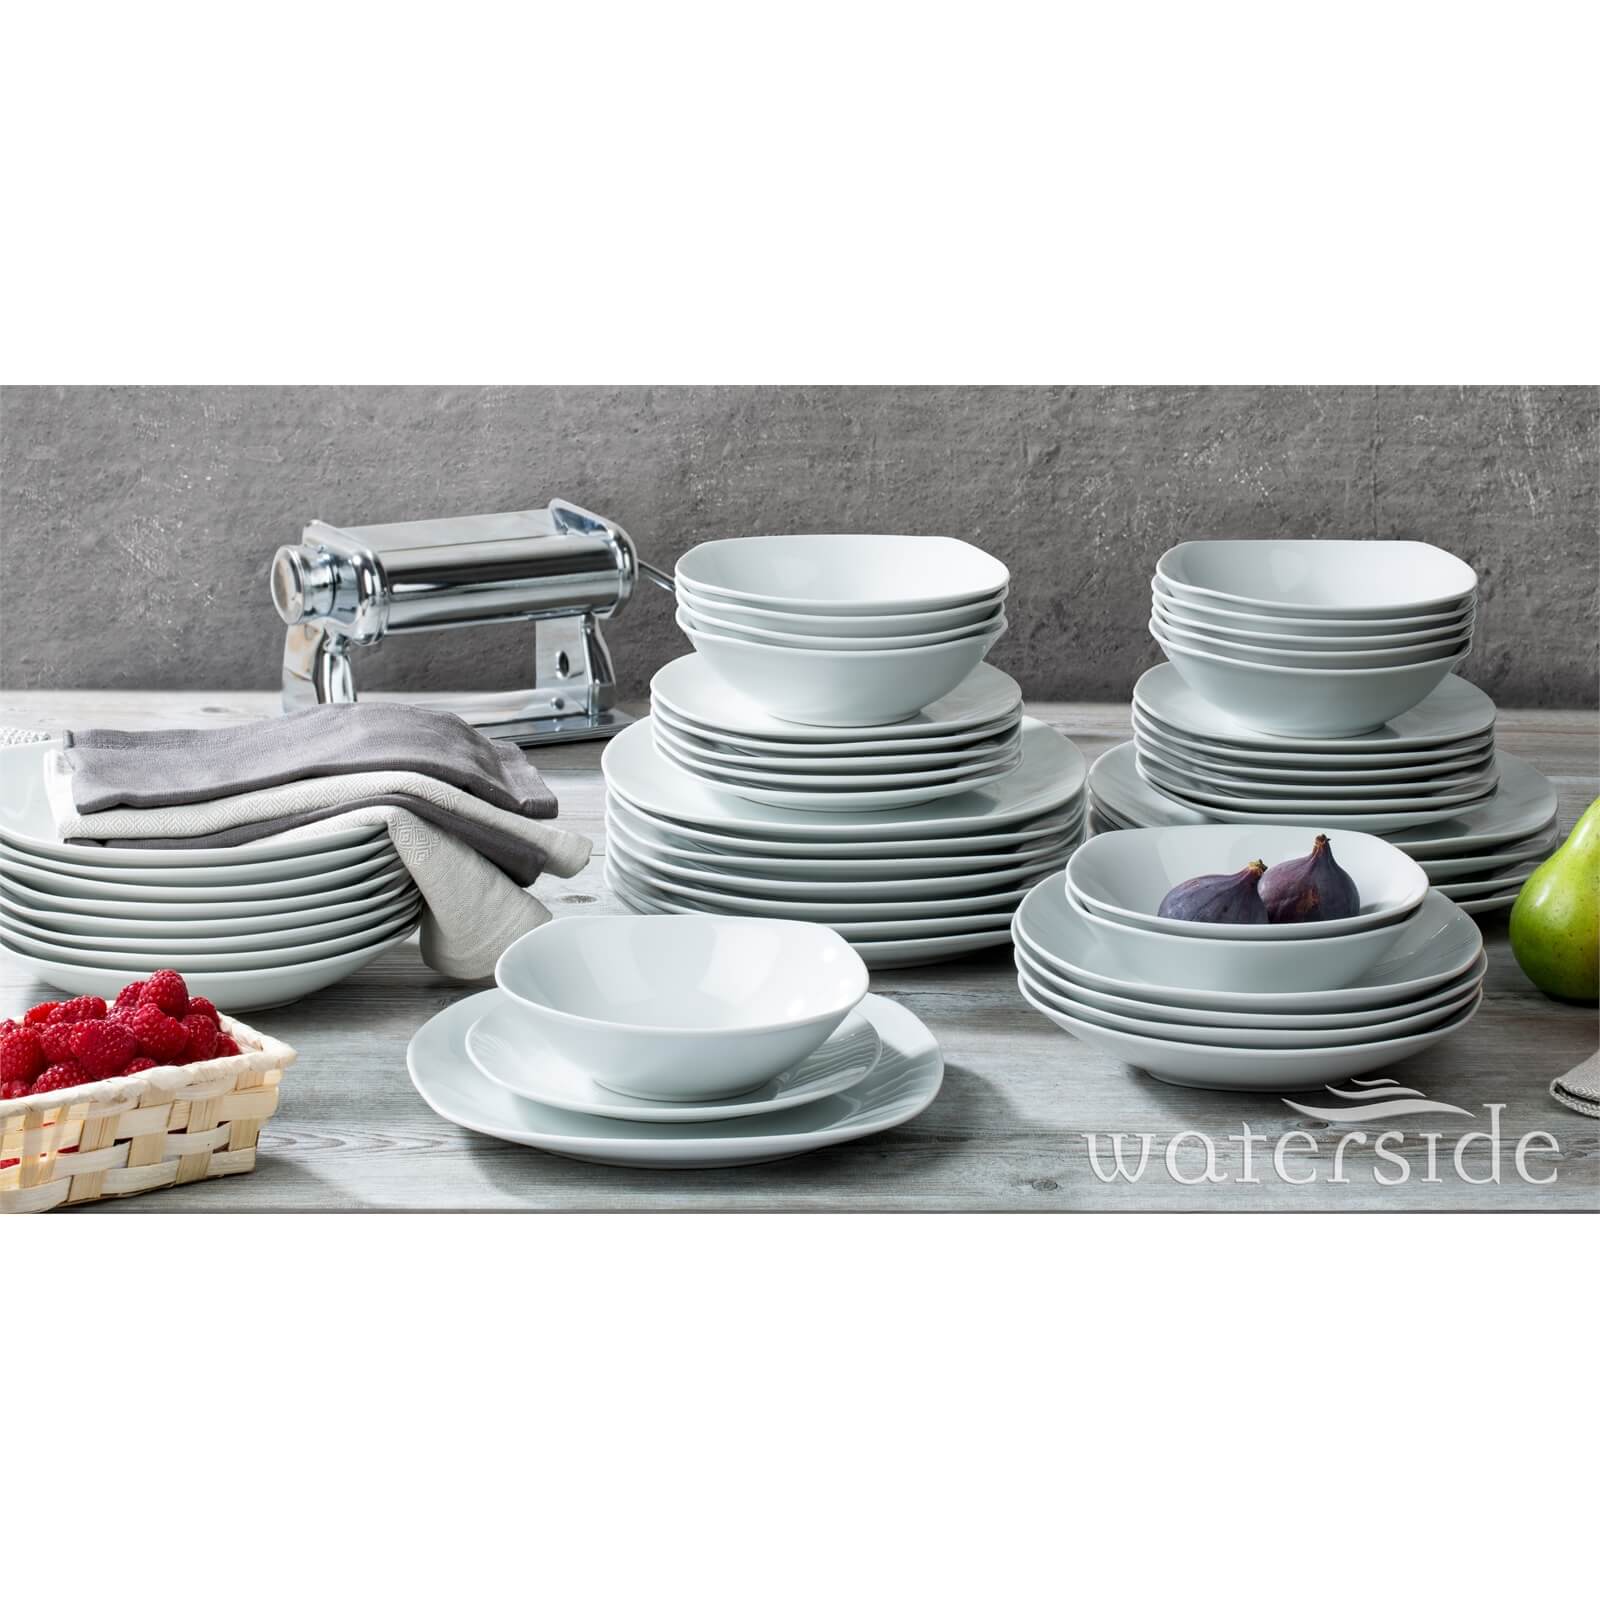 White Square Every Day 48 Piece Dinner Set